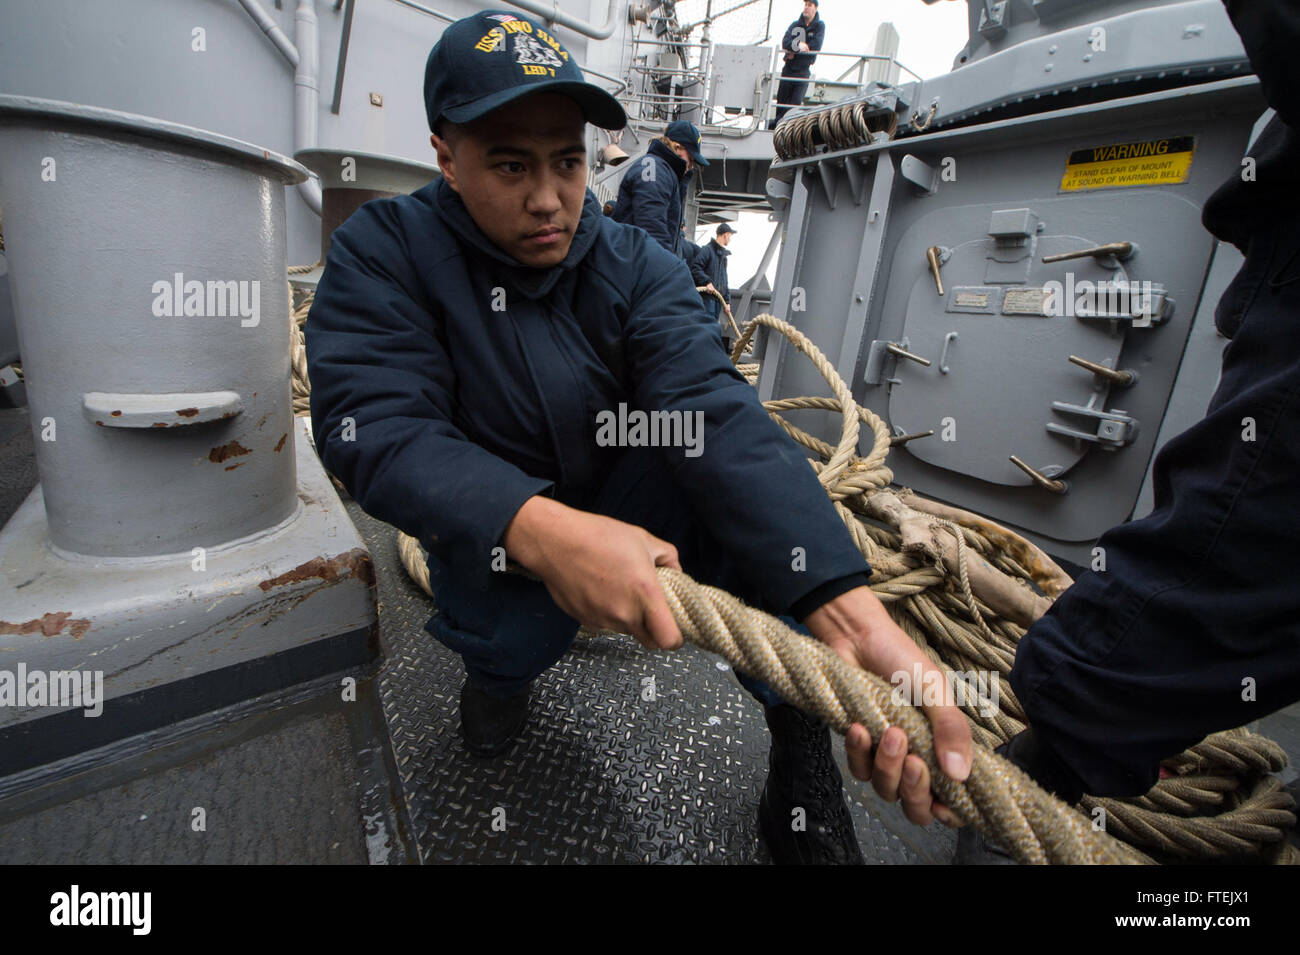 CIVITAVECCHIA, Italy (Jan. 3, 2015) Seaman Paul Banez, originally from Anchorage, Alaska, heaves a mooring line as amphibious assault ship USS Iwo Jima (LHD 7) departs Civitavecchia, Italy, Jan. 3, 2015. Iwo Jima pulled in to Civitavecchia Dec. 30 for a scheduled port visit before continuing its deployment in support of maritime security operations and theater security cooperation efforts in the U.S. 6th Fleet areas of operations. Stock Photo